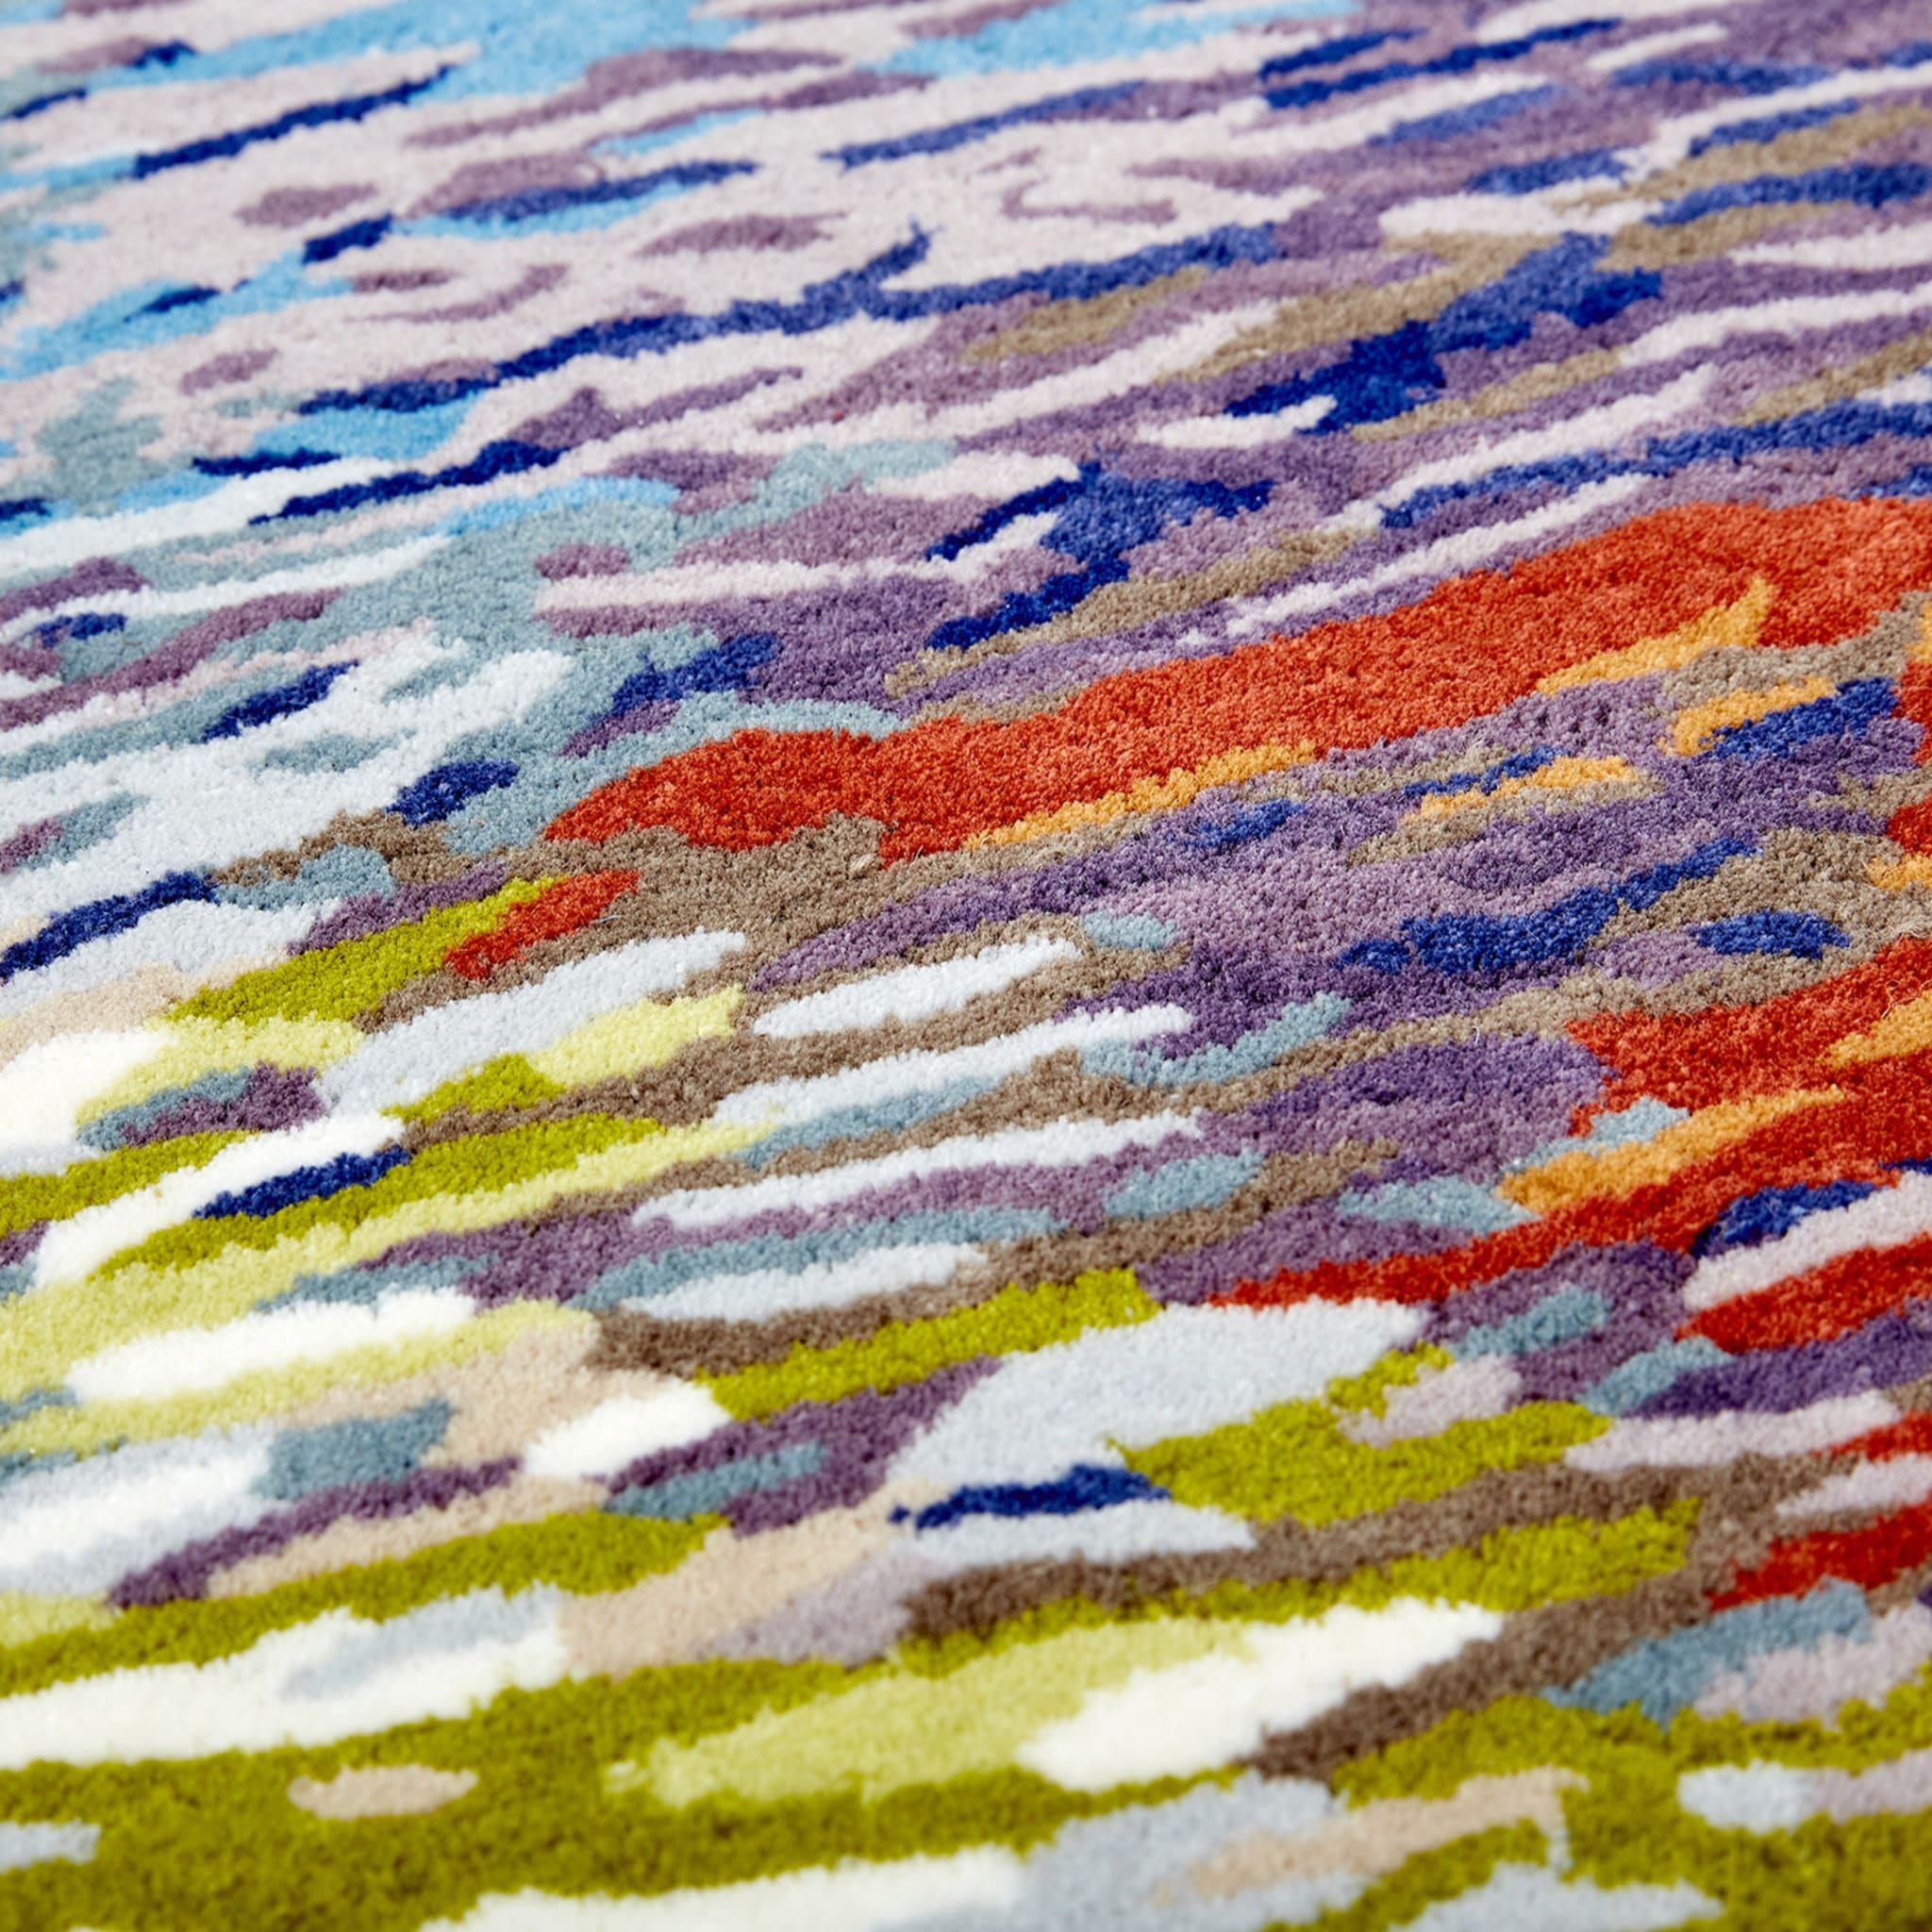 Spectrum Wool Rug by Clémentine Chambon - Limited Edition - Alternative view 4